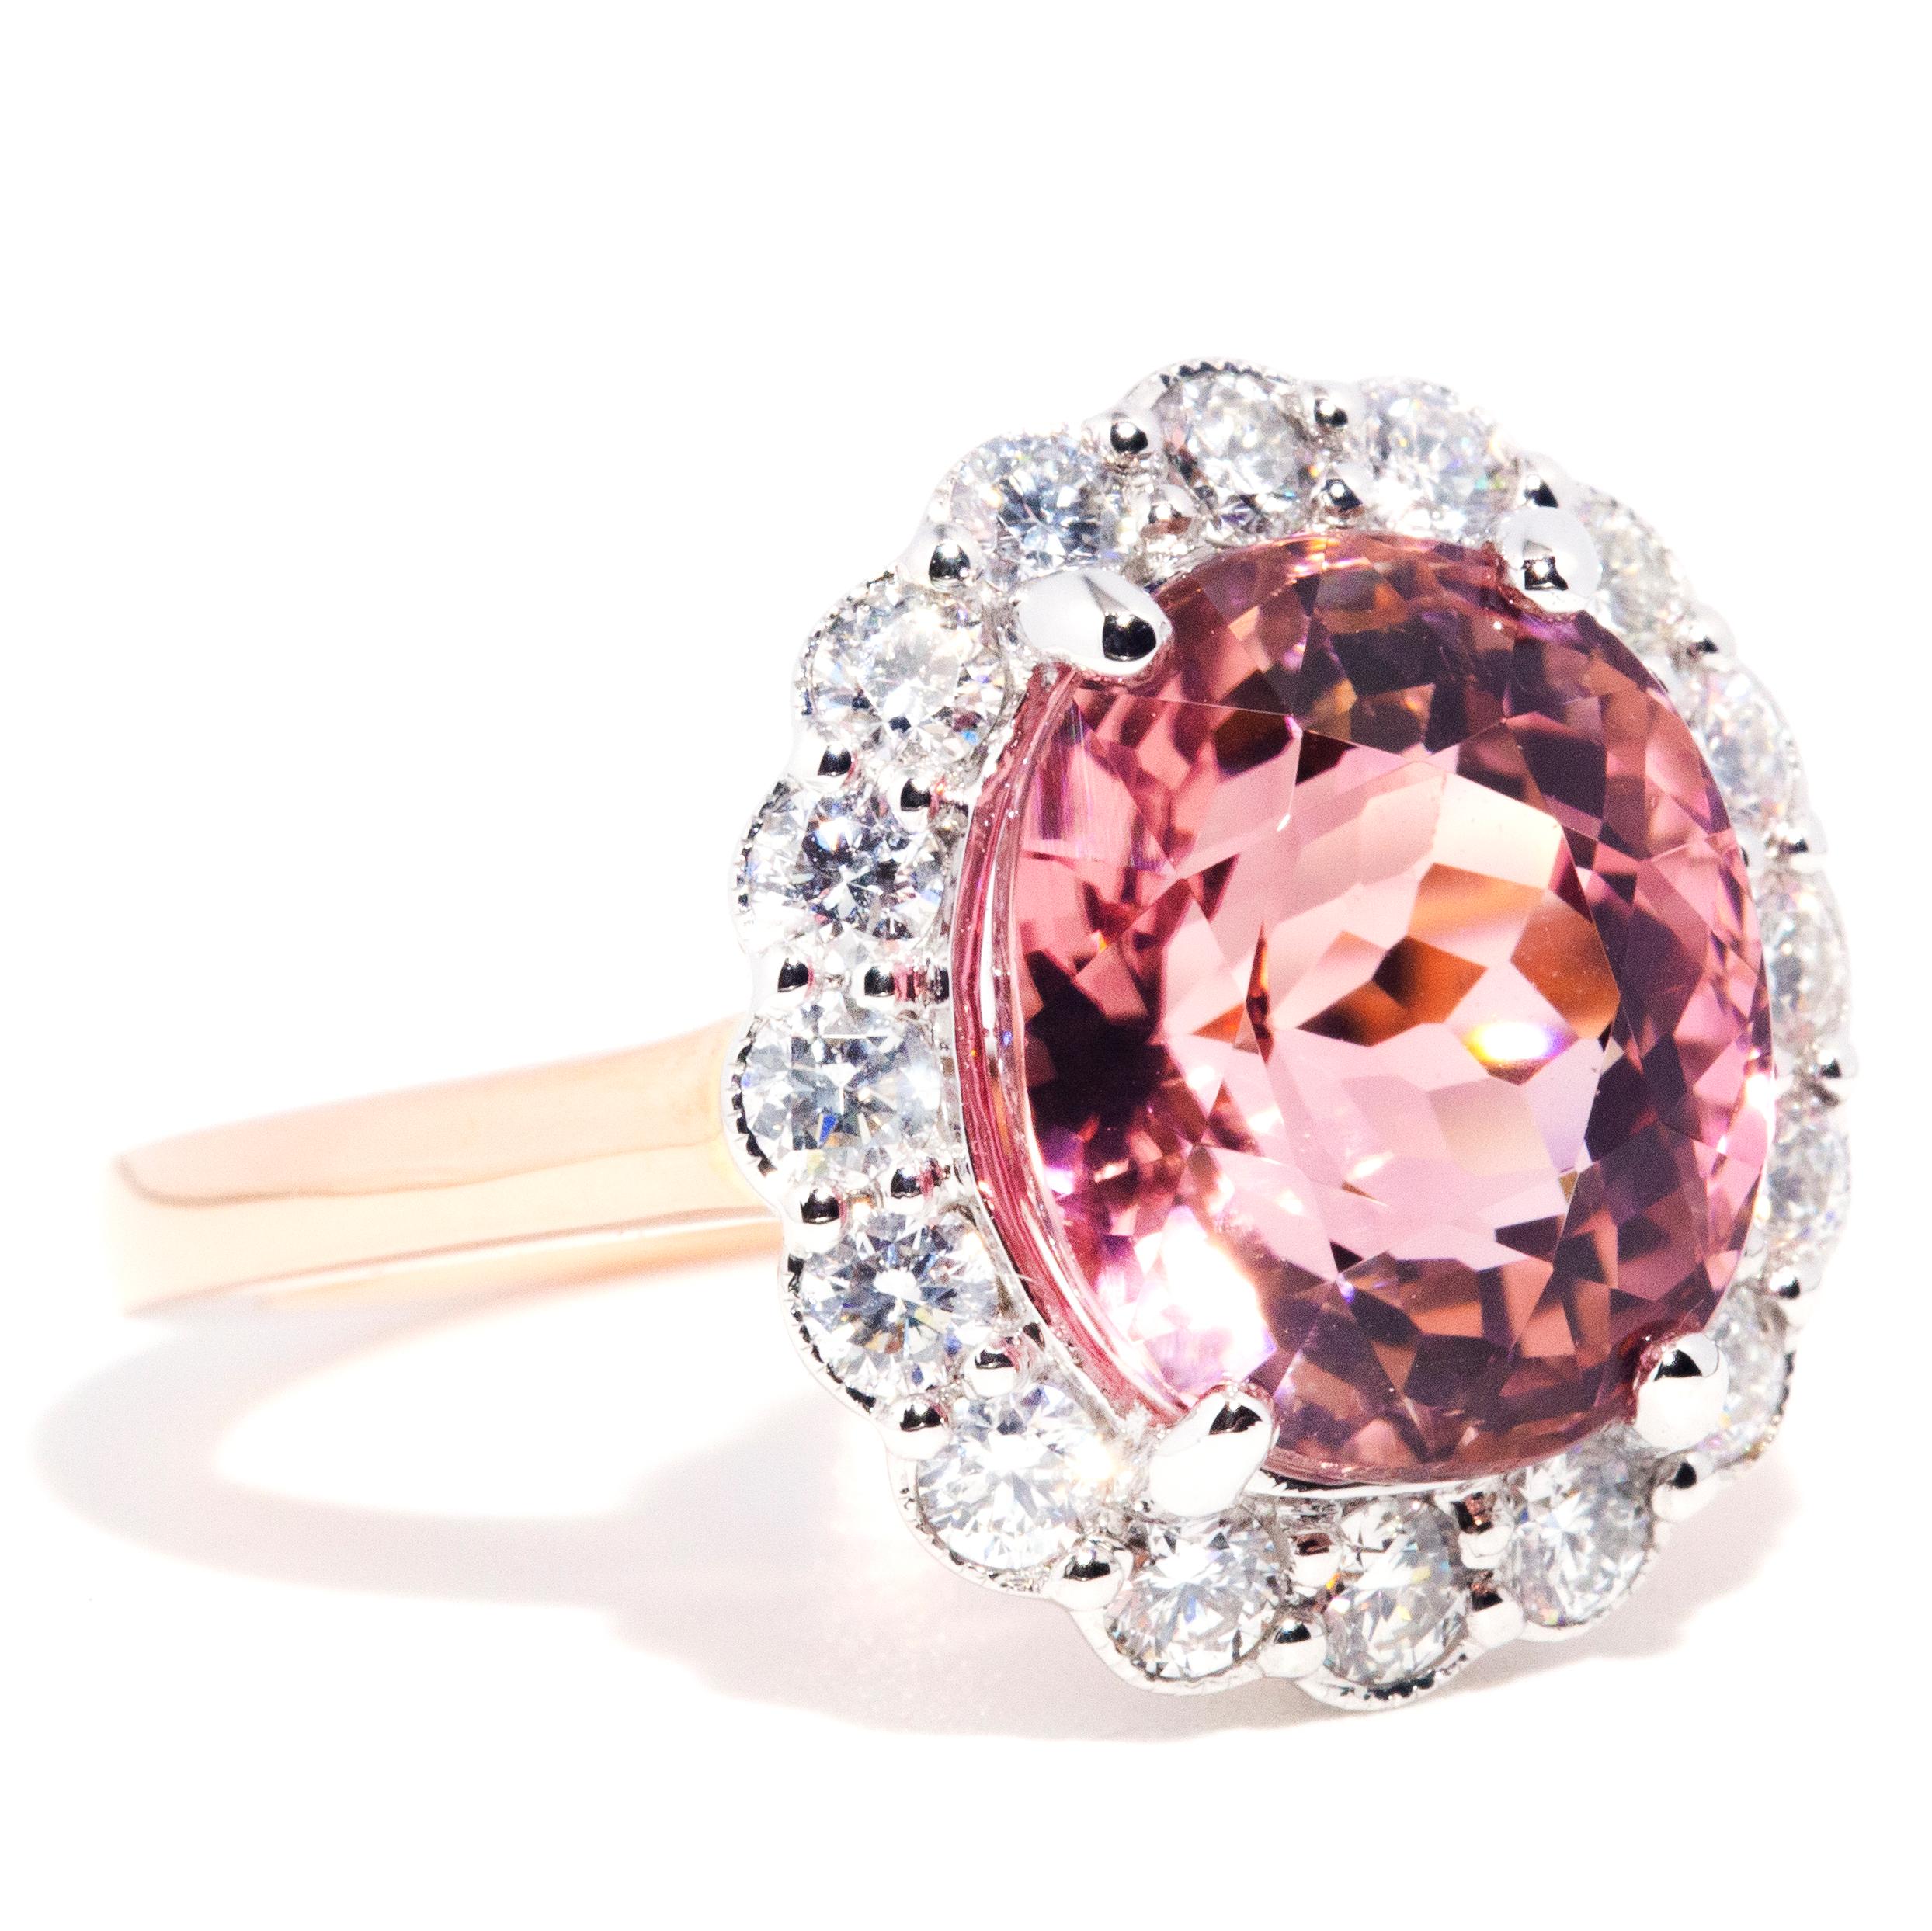 Oval Cut 5.86 Carat Flawless Pink Tourmaline and Diamond Contemporary 18 Carat Gold Ring